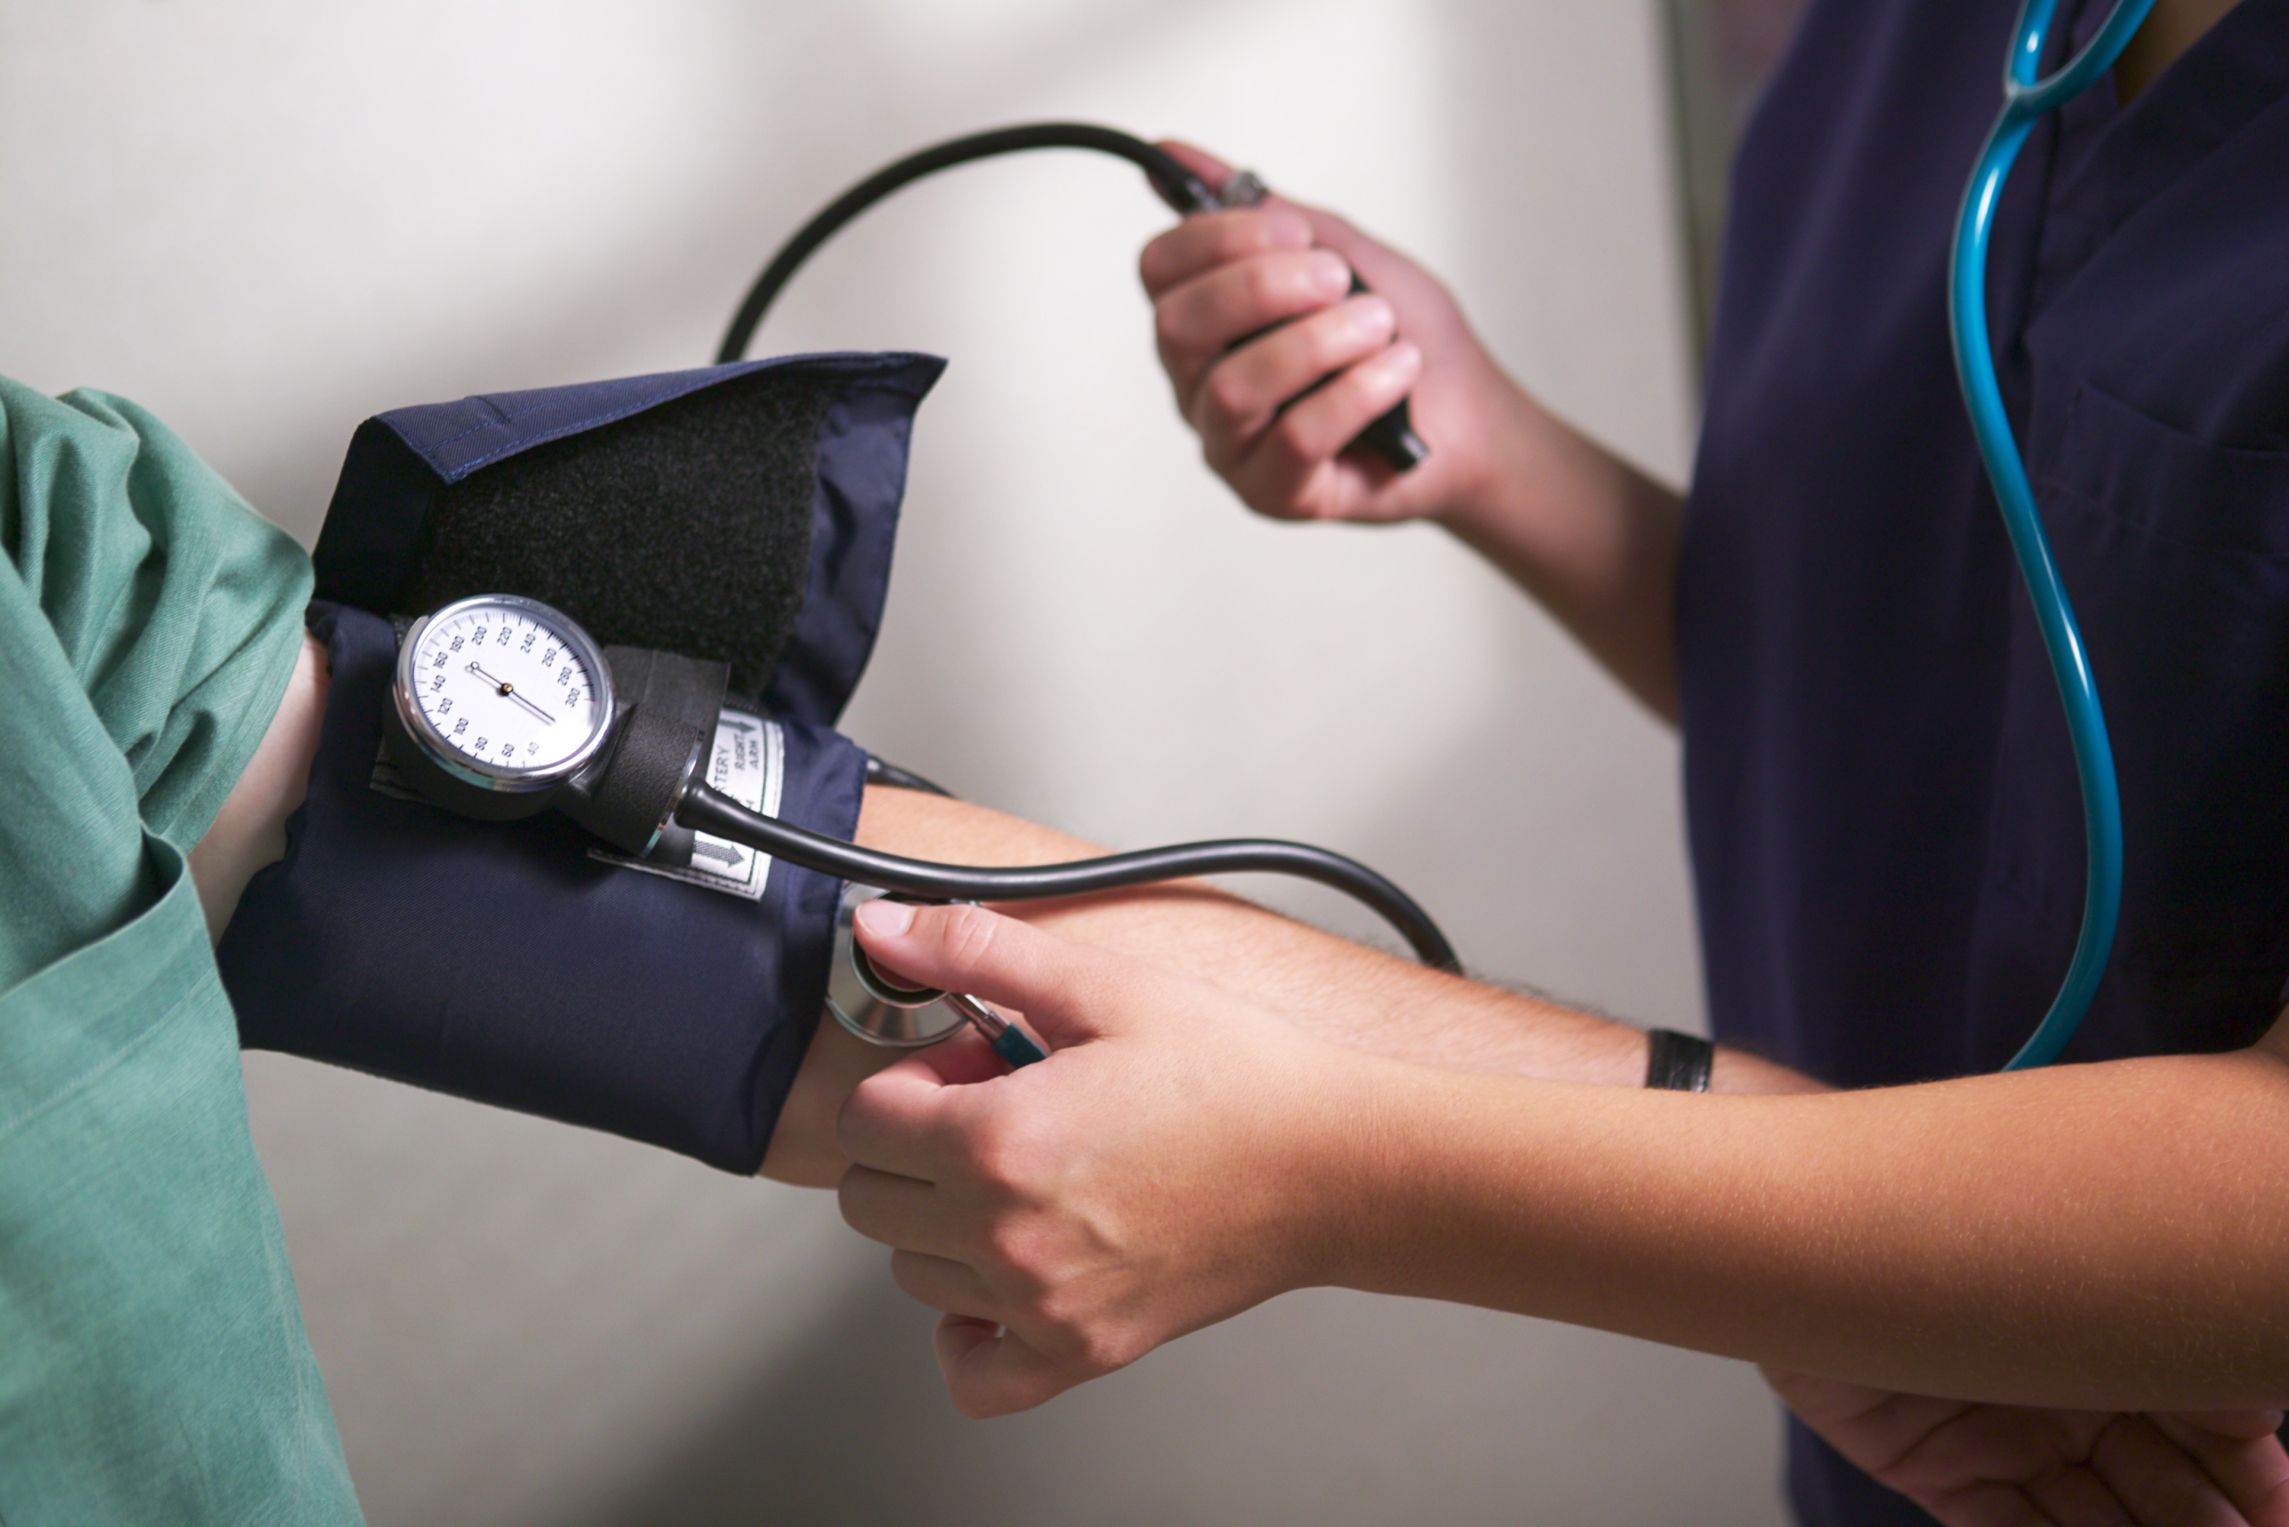 This New Blood Pressure Monitor Could Radically Shift How We Track Diseases